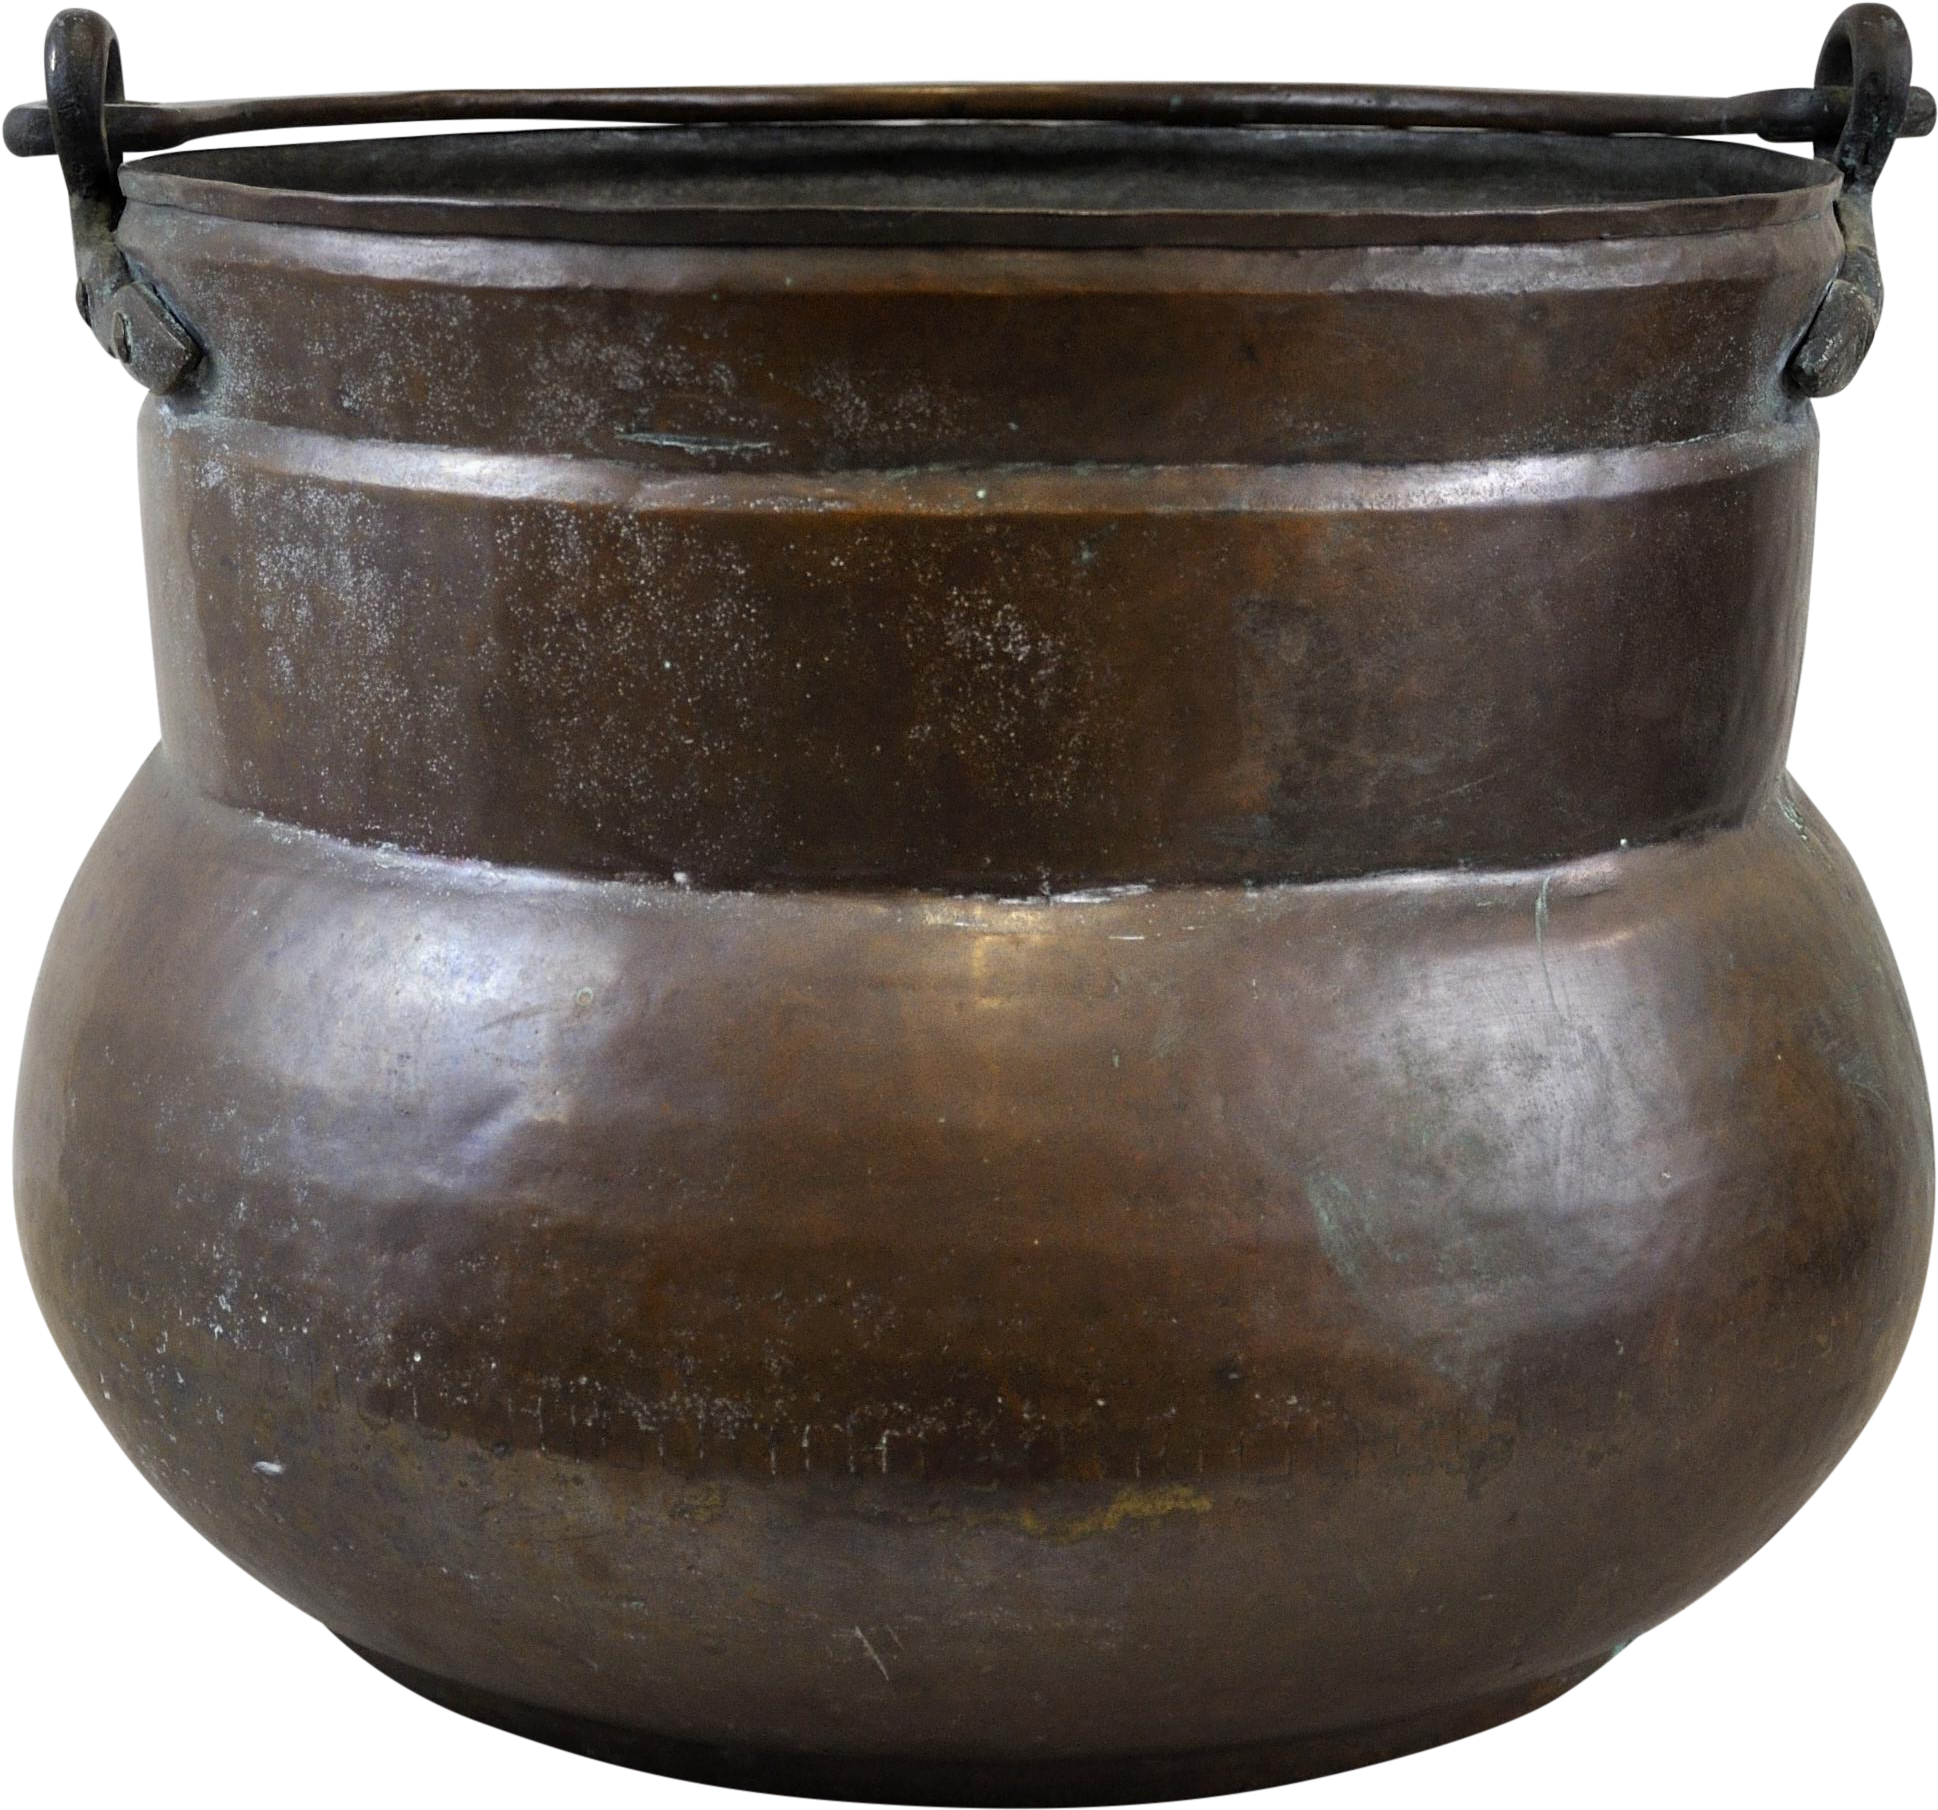 A Large Metal Pot With A Handle